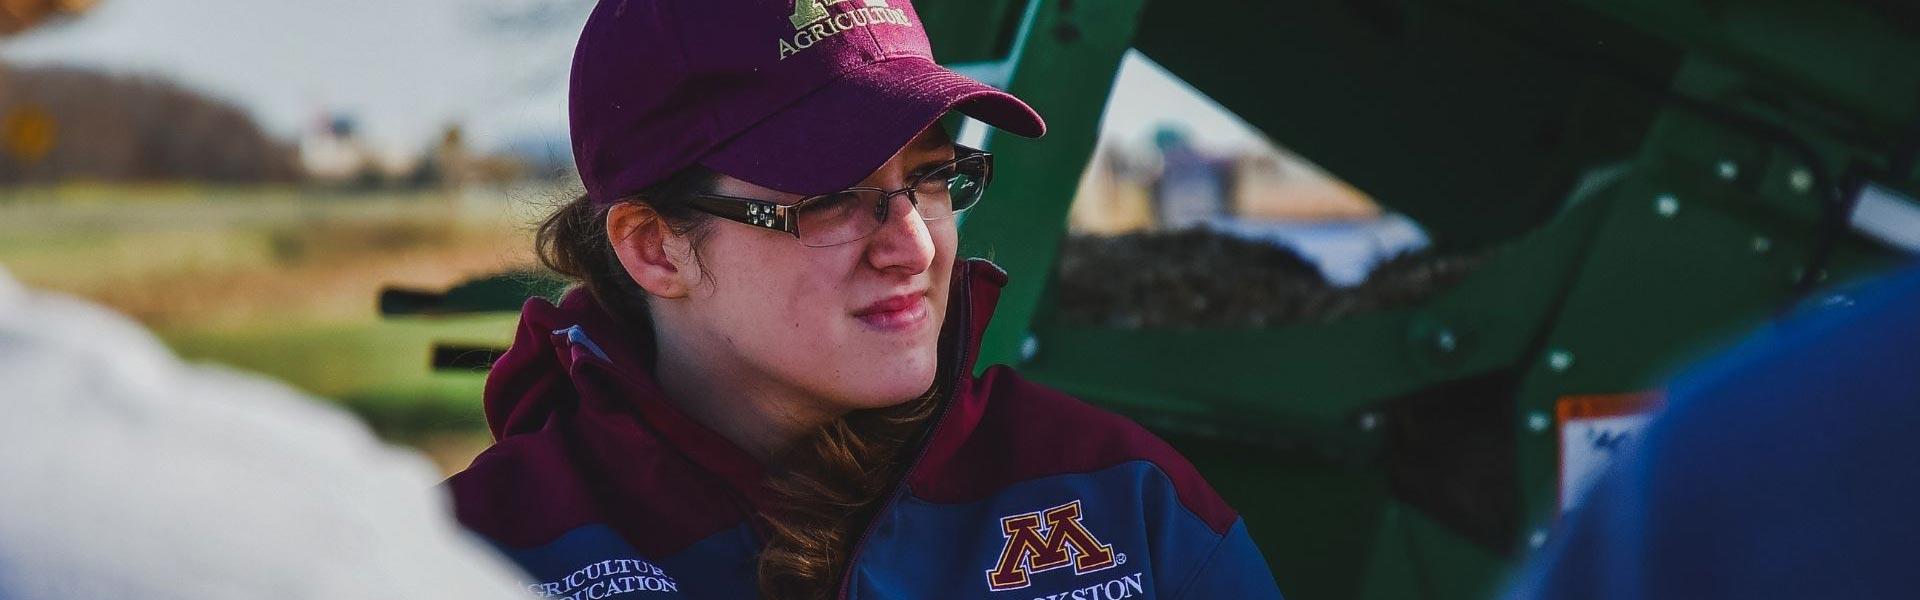 Ag student standing out in a grain field